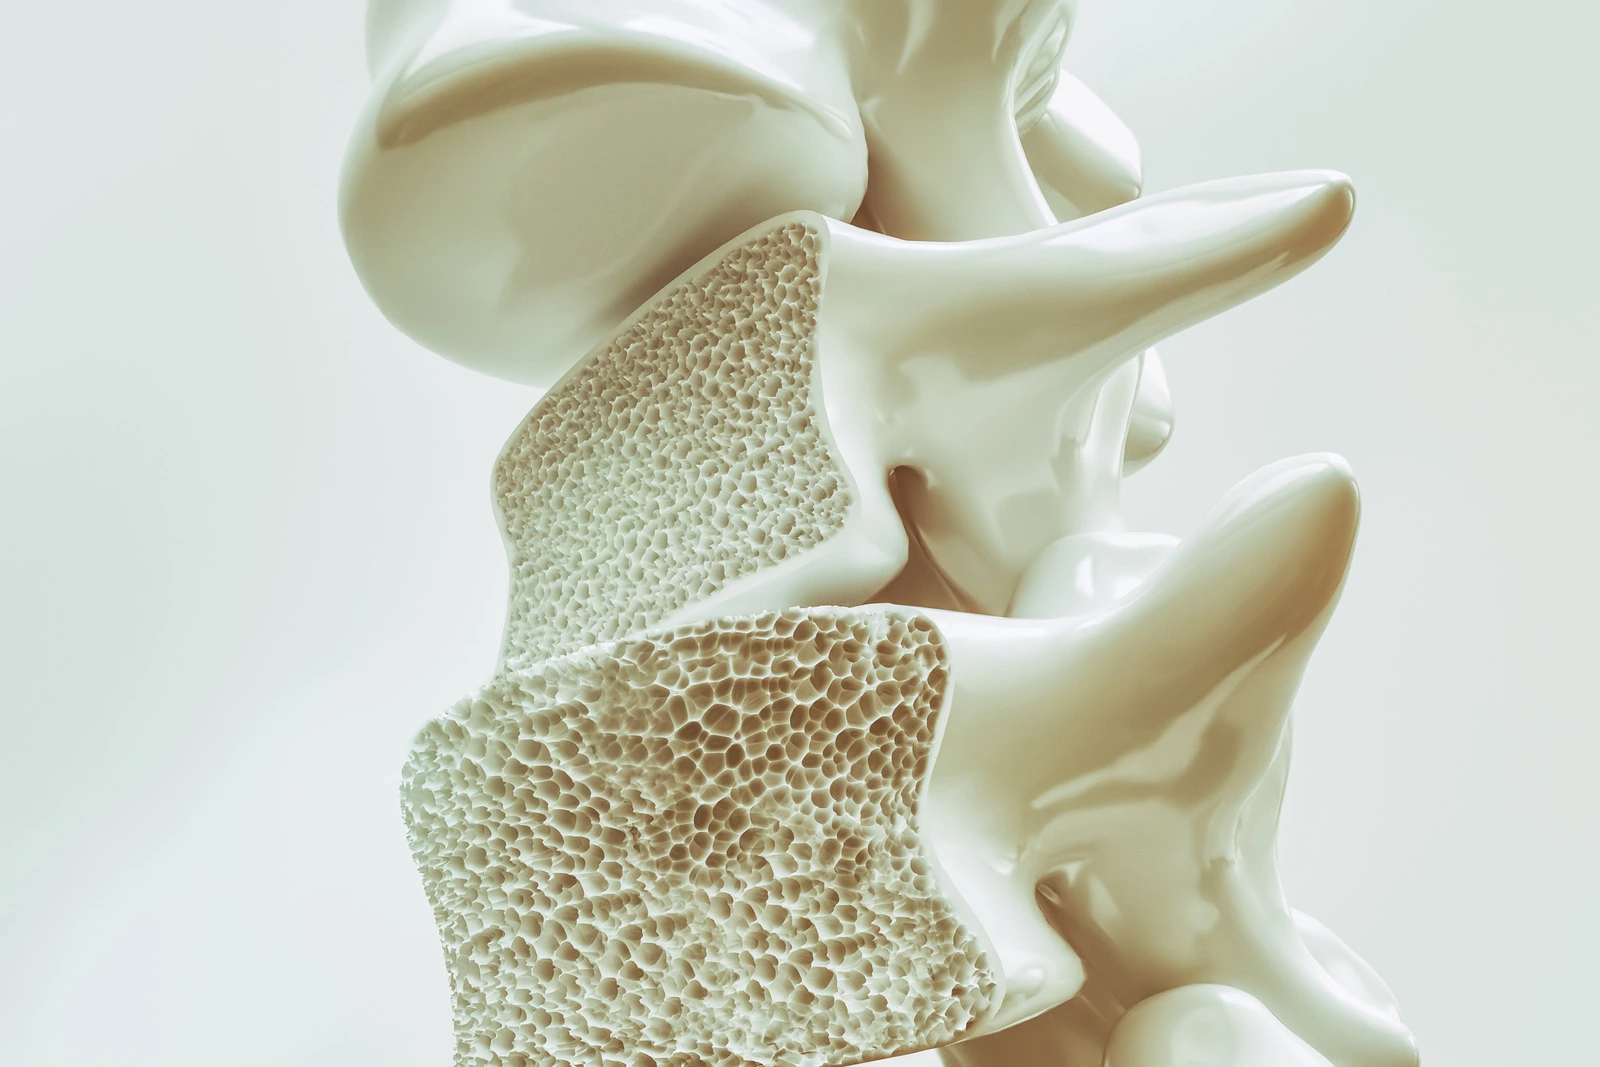 Prevent Osteoporosis, Fragility Fracture Can Be Deadly